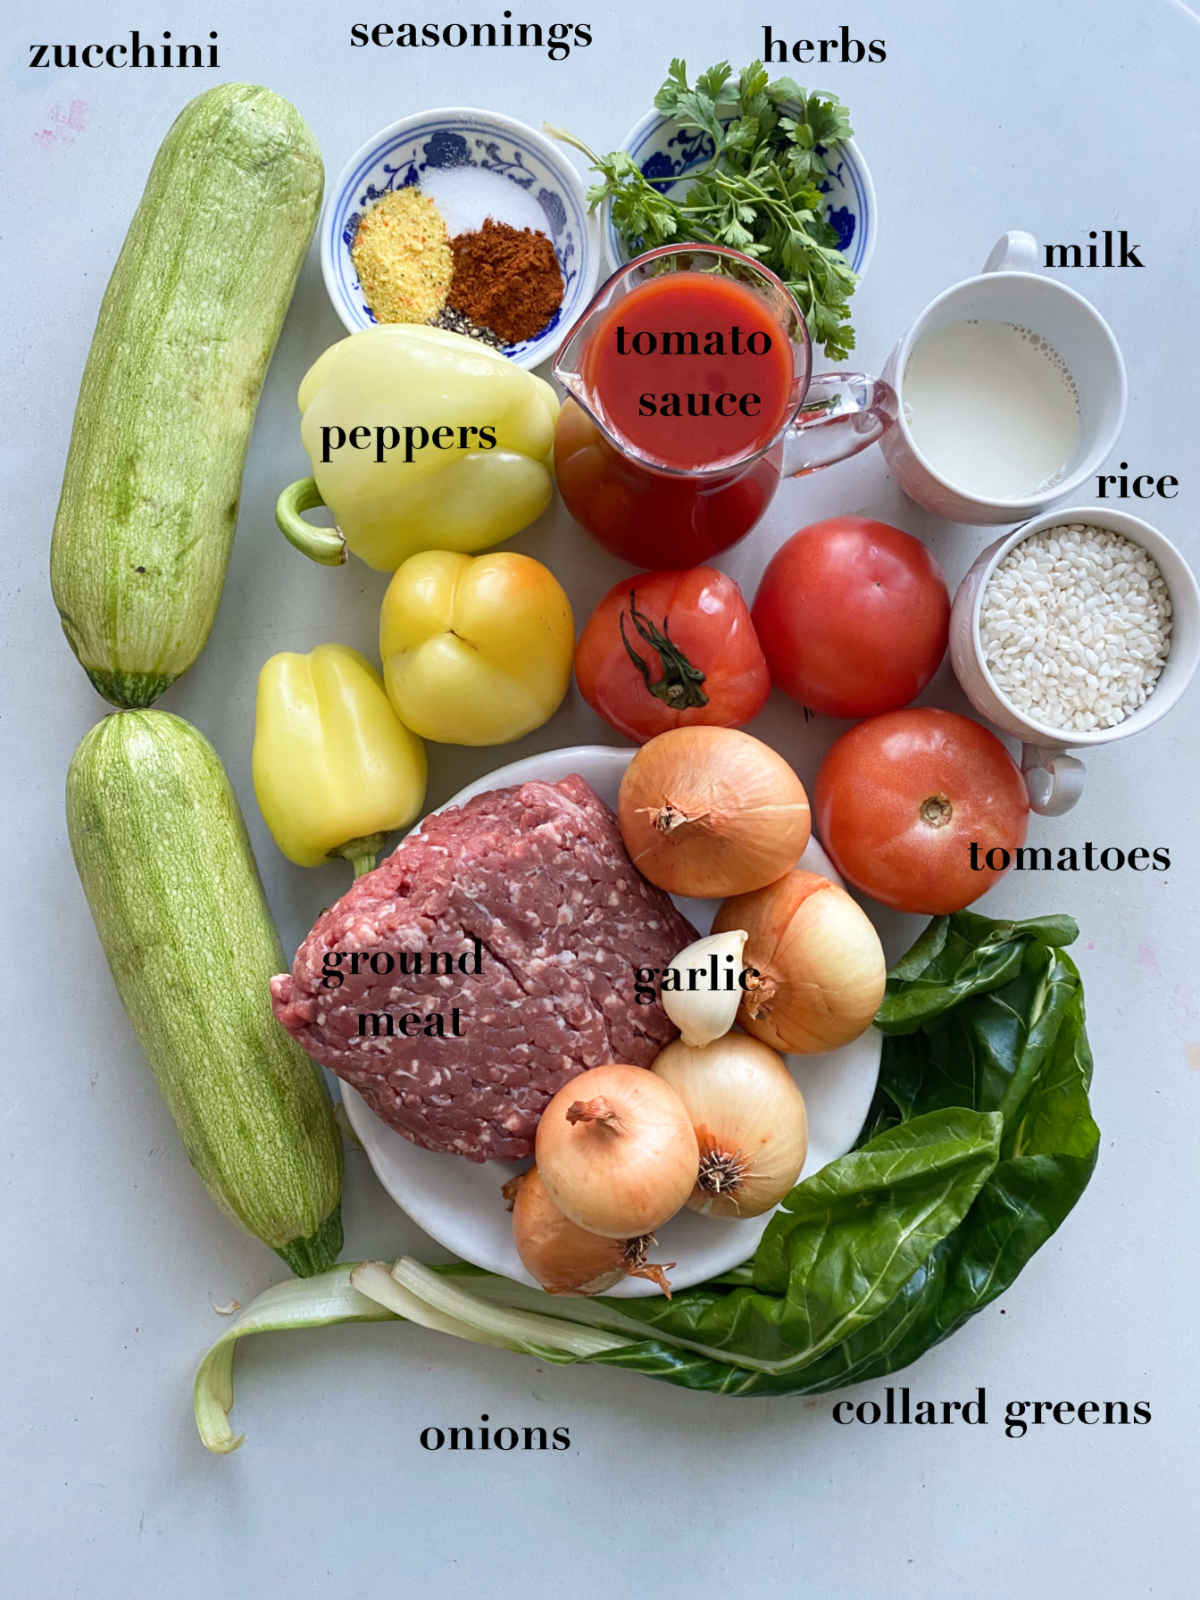 Ingredients (zucchini, seasonings, herbs, milk, rice, tomatoes, peppers, ground beef, onions, garlic and collard greens) on a light gray background.